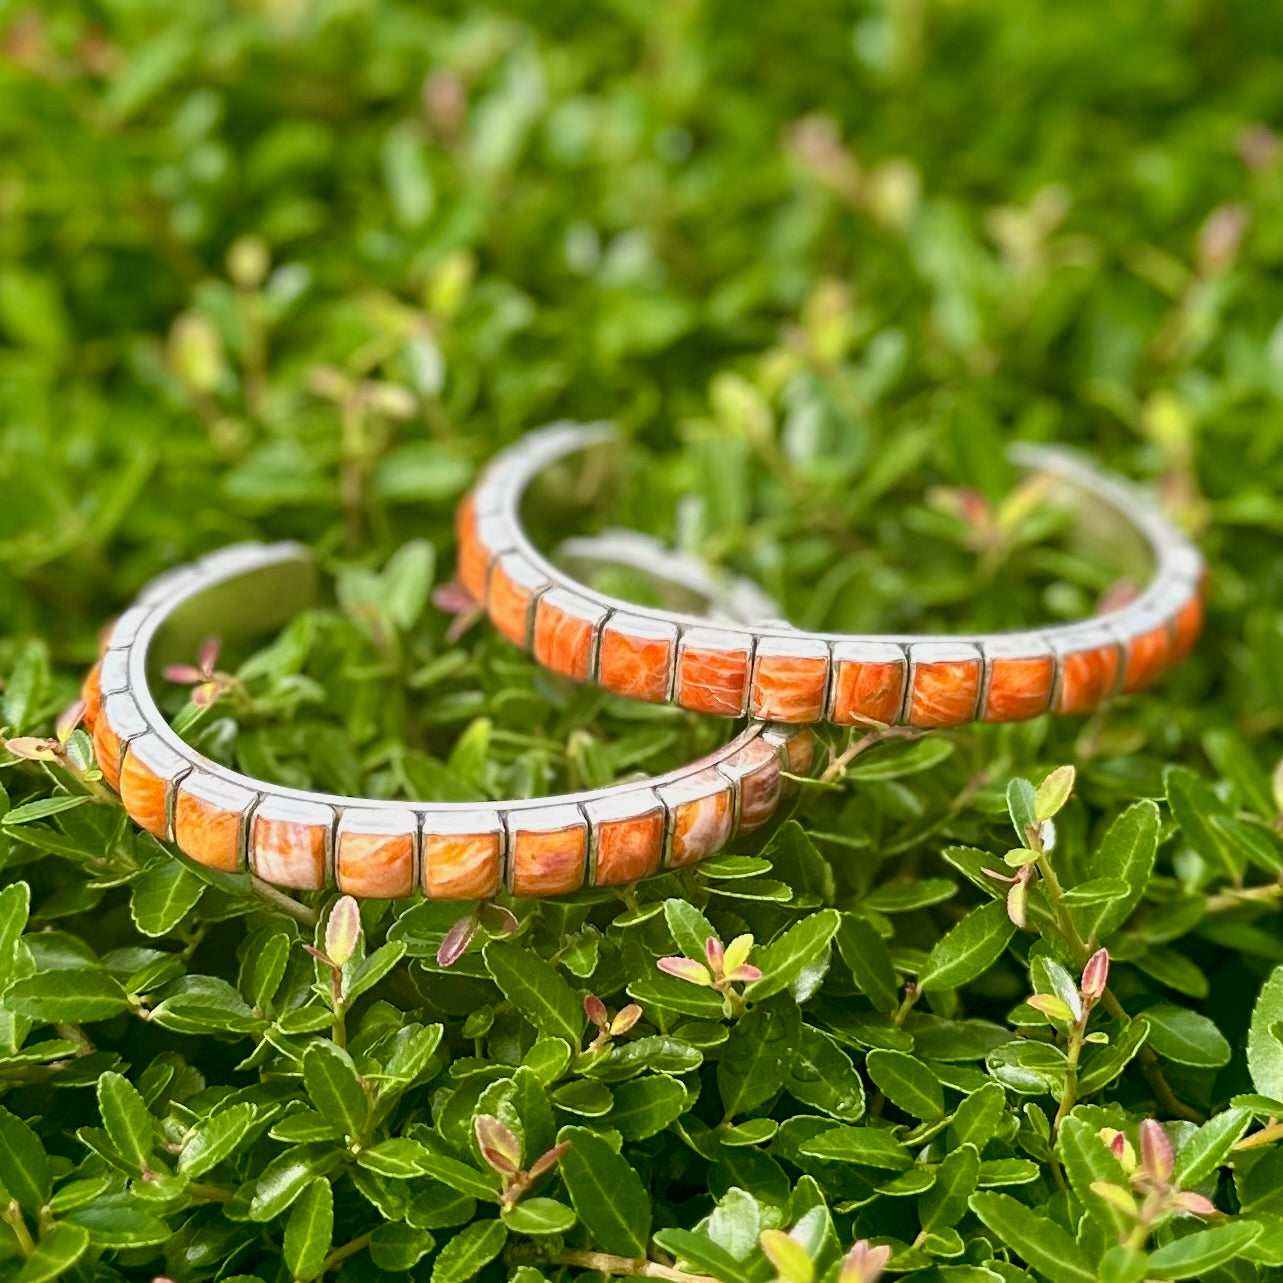 Federico's 20 Square Stone Stacker Cuff - Orange Spiney Oyster  Trends & Traditions Boutique   